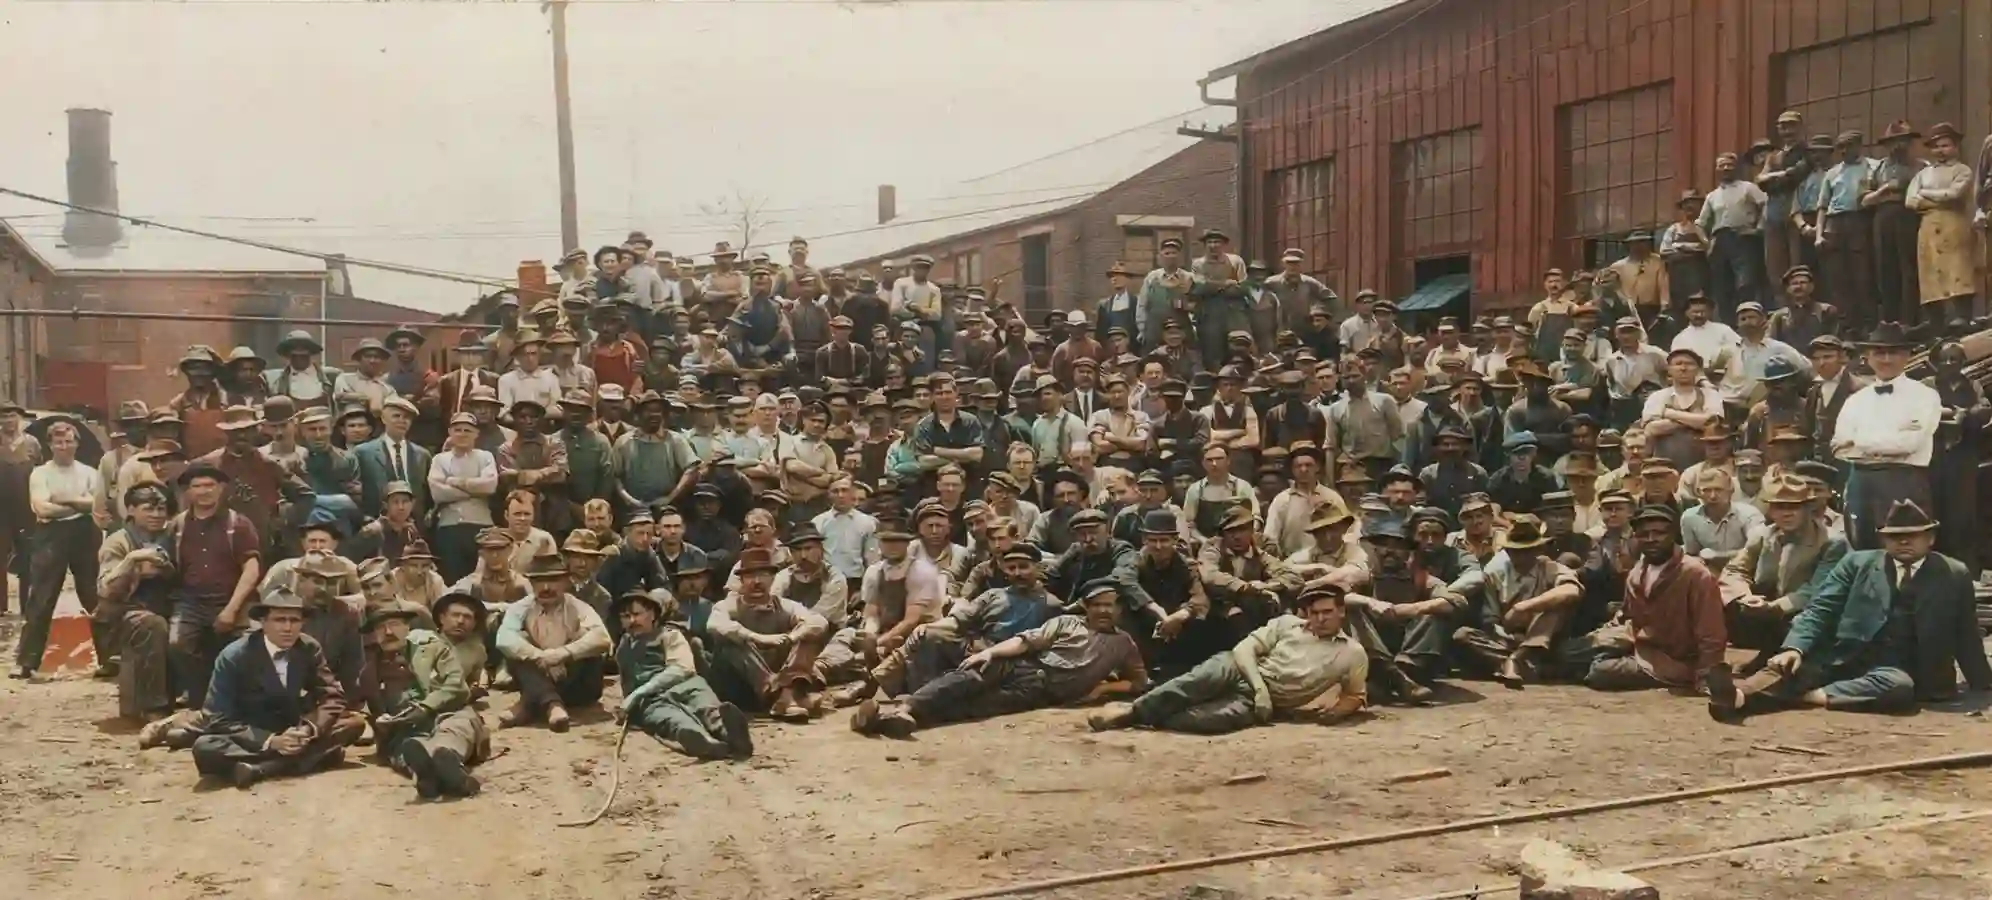 Historical group photo of employees